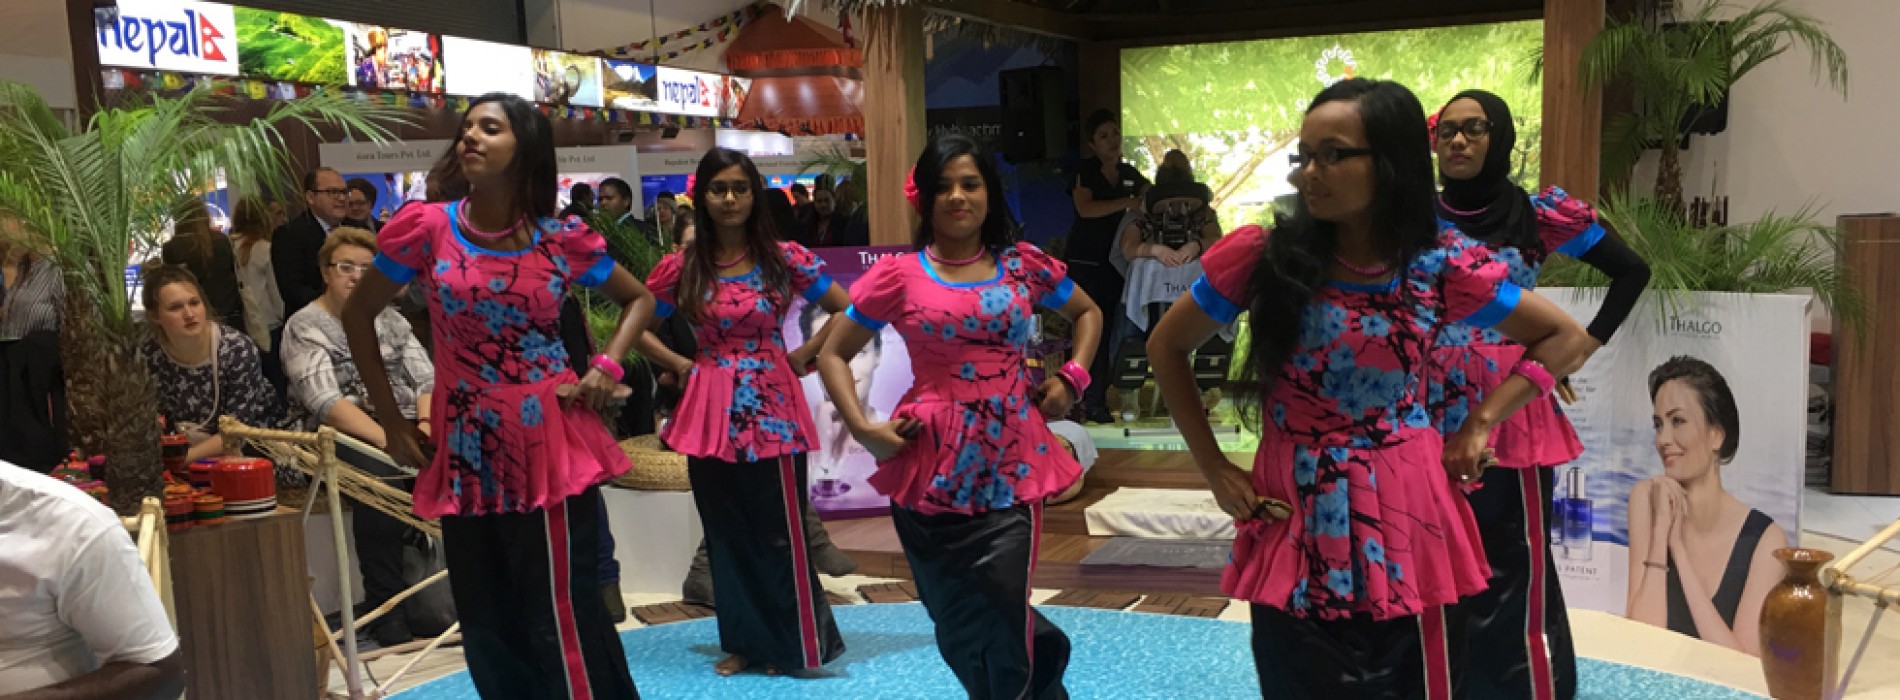 Maldives showcases destination experiences at the World’s leading Travel trade show, ITB